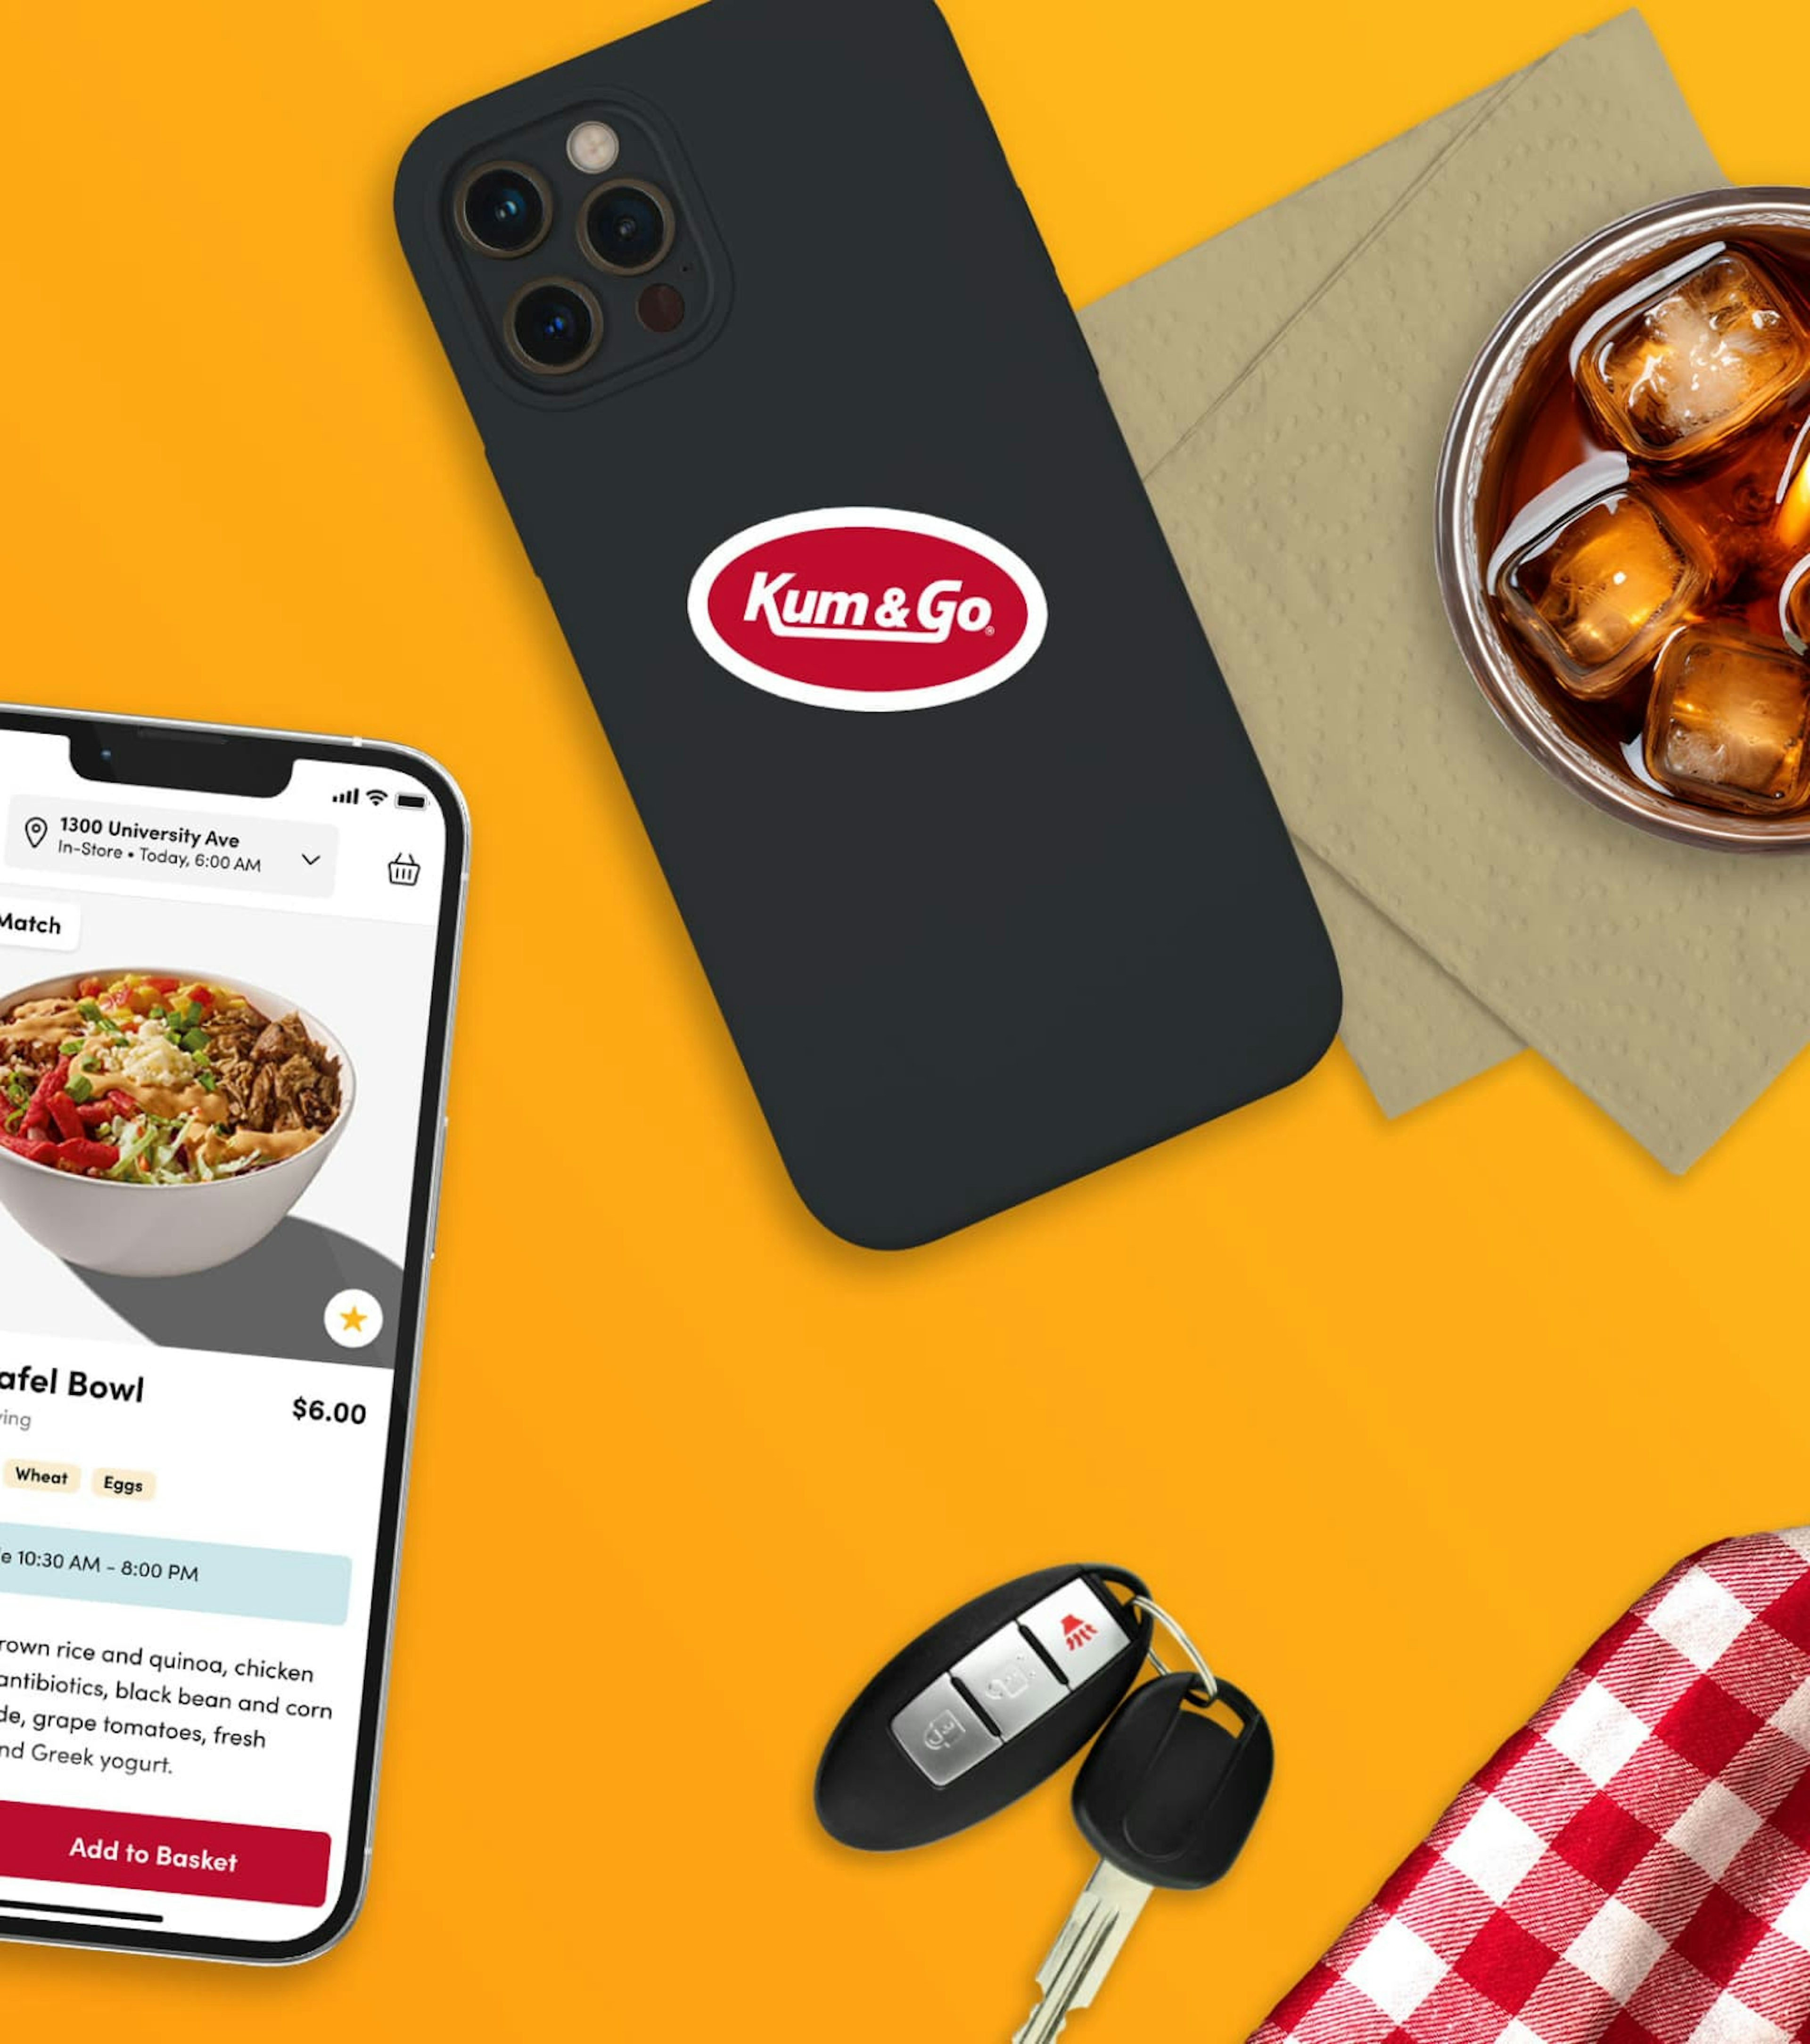 Kum & Go website on an iPhone screen, surrounded by food and drinks that can be purchased through the mobile app.